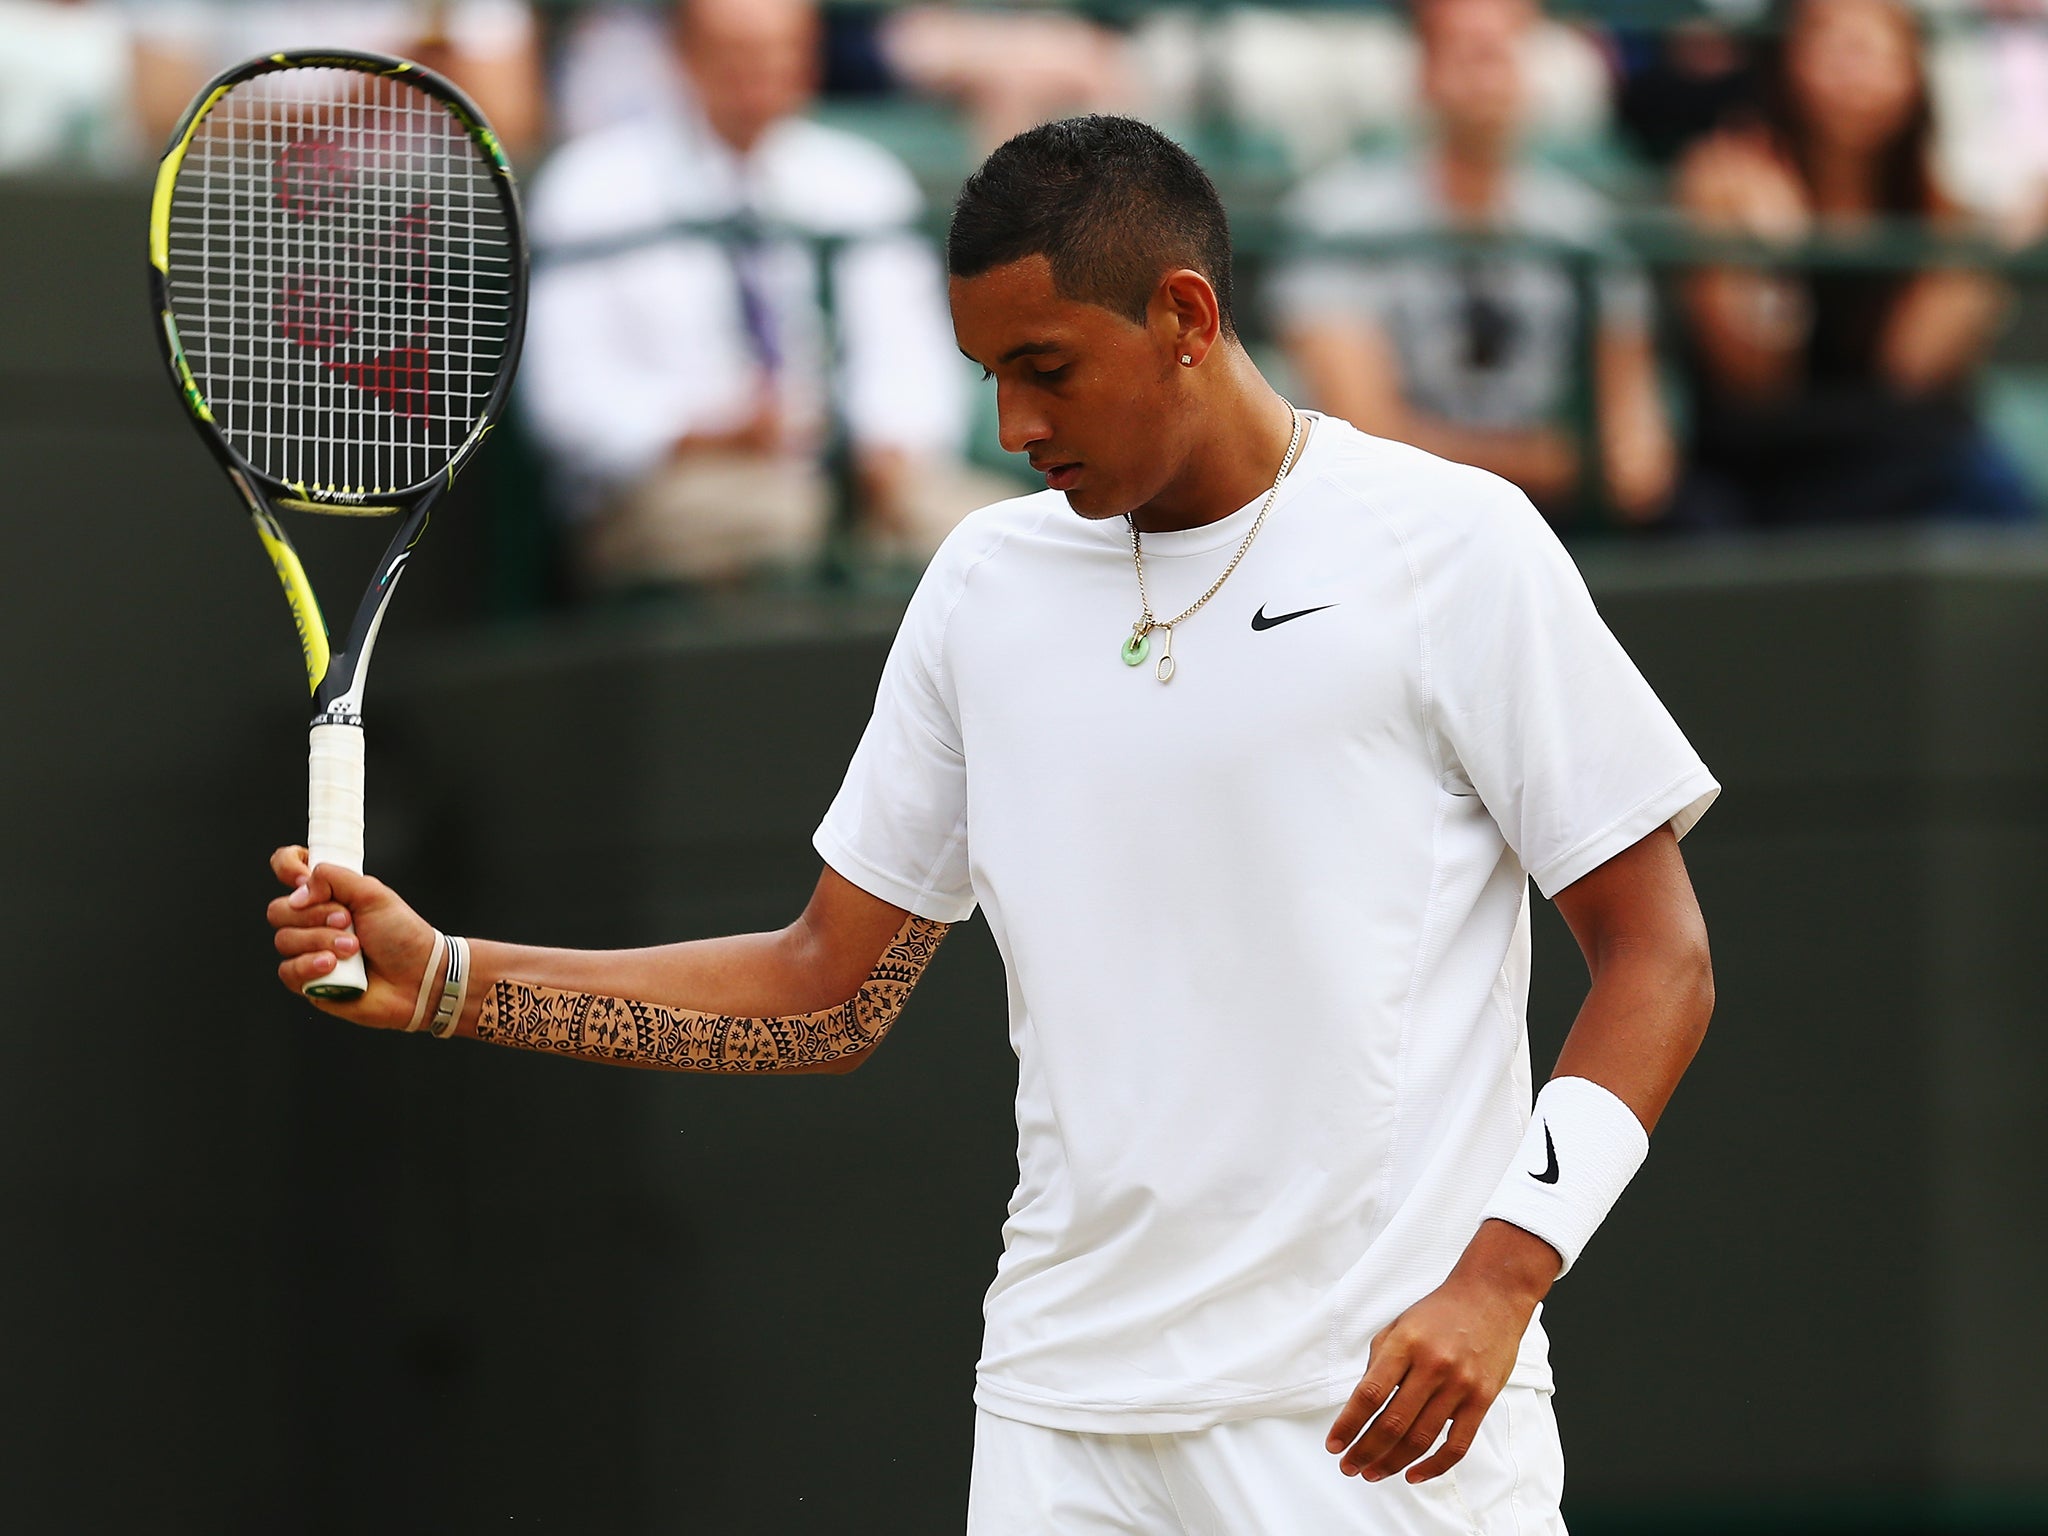 Nick Kyrgios shows his frustration during his Gentlemen's Singles quarter-final match defeat to Milos Raonic